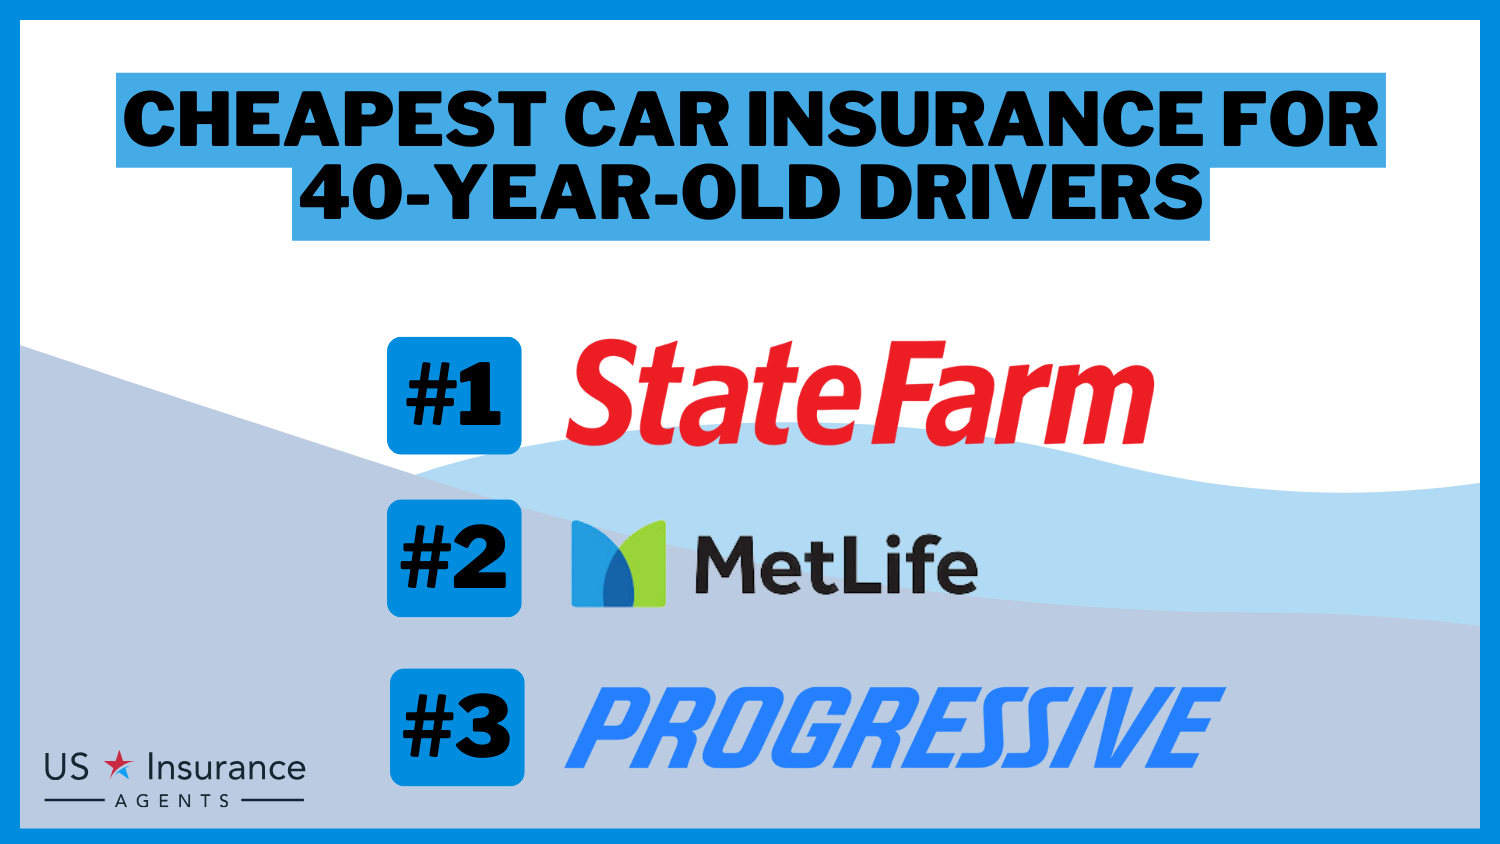 State Farm, MetLife, Progressive: Cheapest Car Insurance for 40-Year-Old Drivers